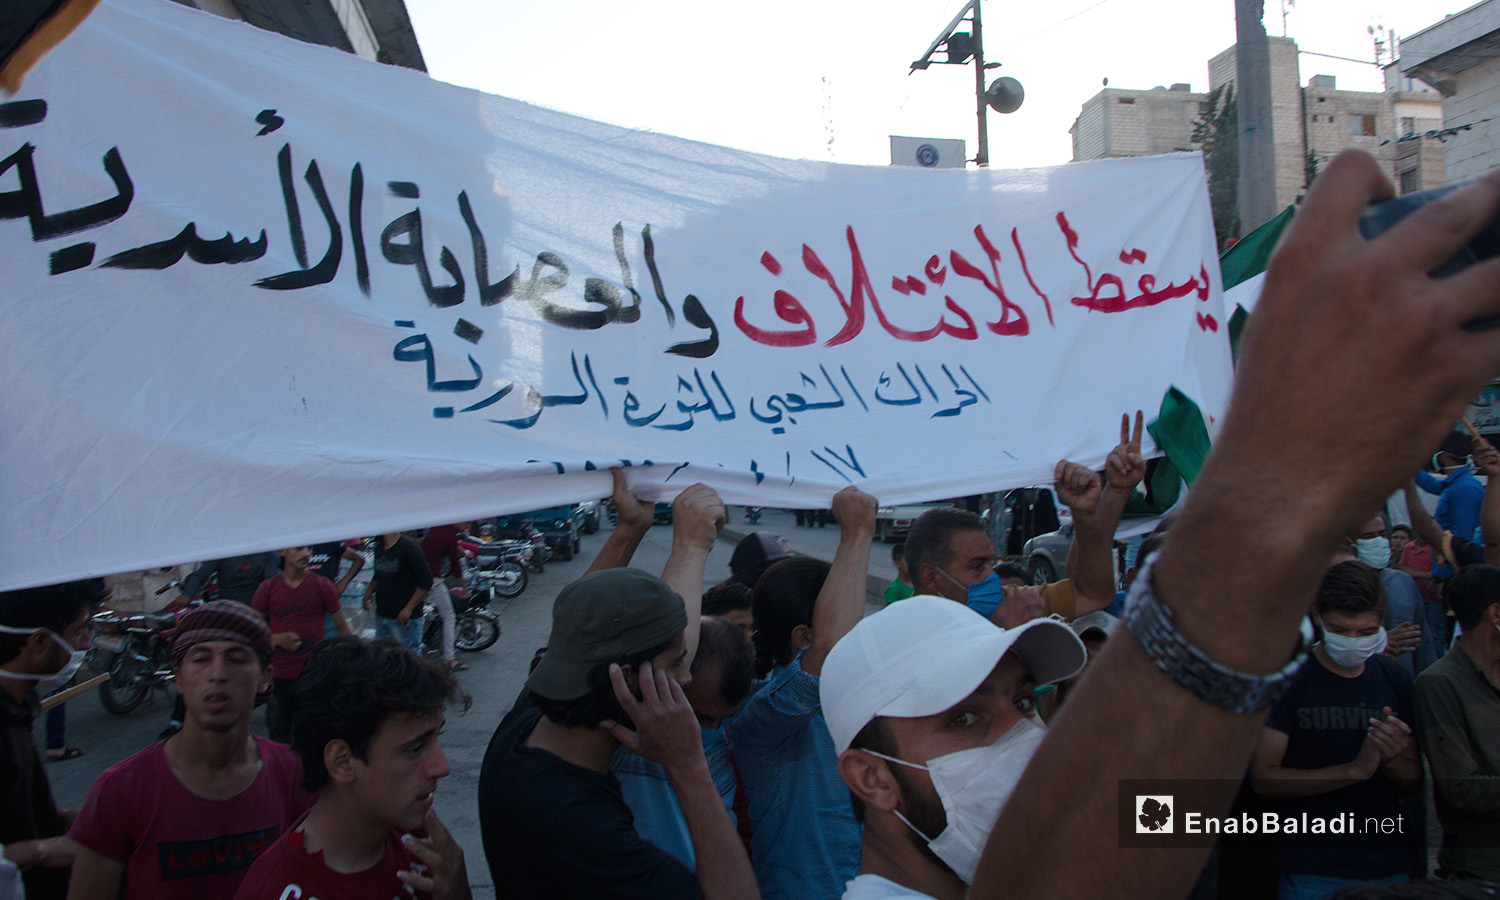 A protest stand in Idlib province against the National Coalition of Syrian Revolution and Opposition Forces and al-Assad’s gangs – 17 July 2020 (Enab Baladi / Anas al-Khouli)